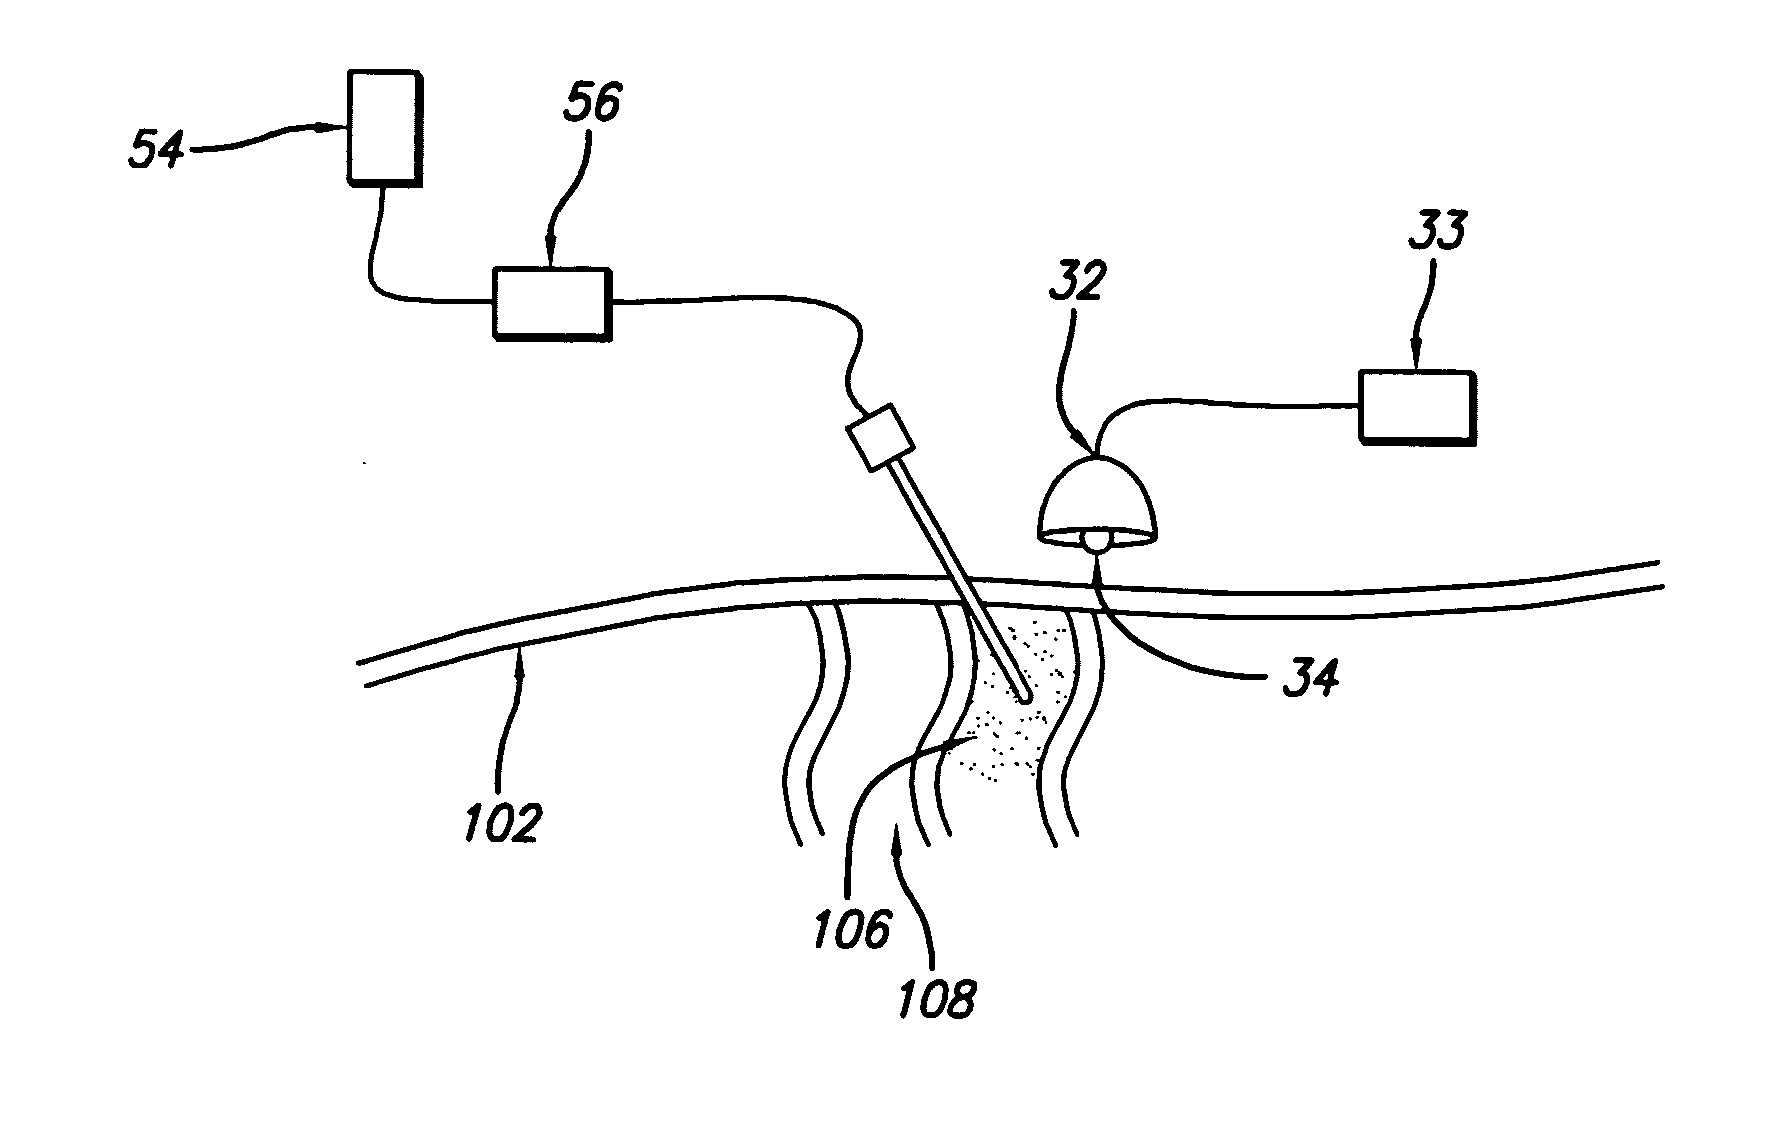 Apparatus and method for disrupting subcutaneous structures